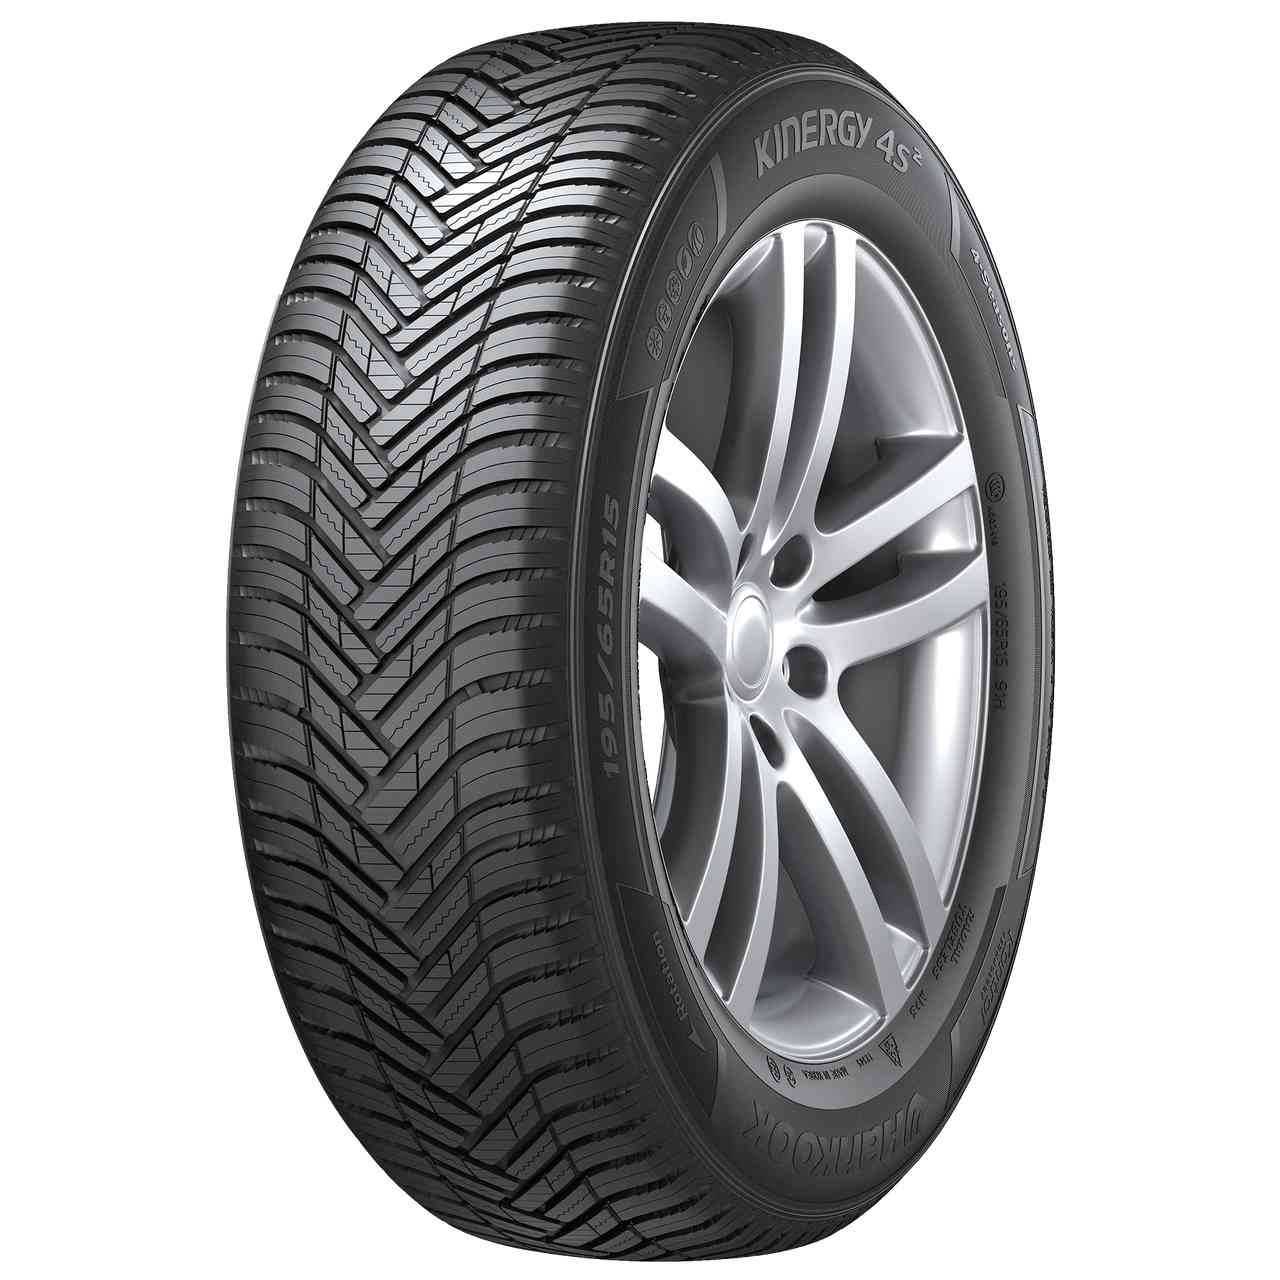 HANKOOK KINERGY 4S 2 (H750) 215/45ZR18 93Y BSW XL